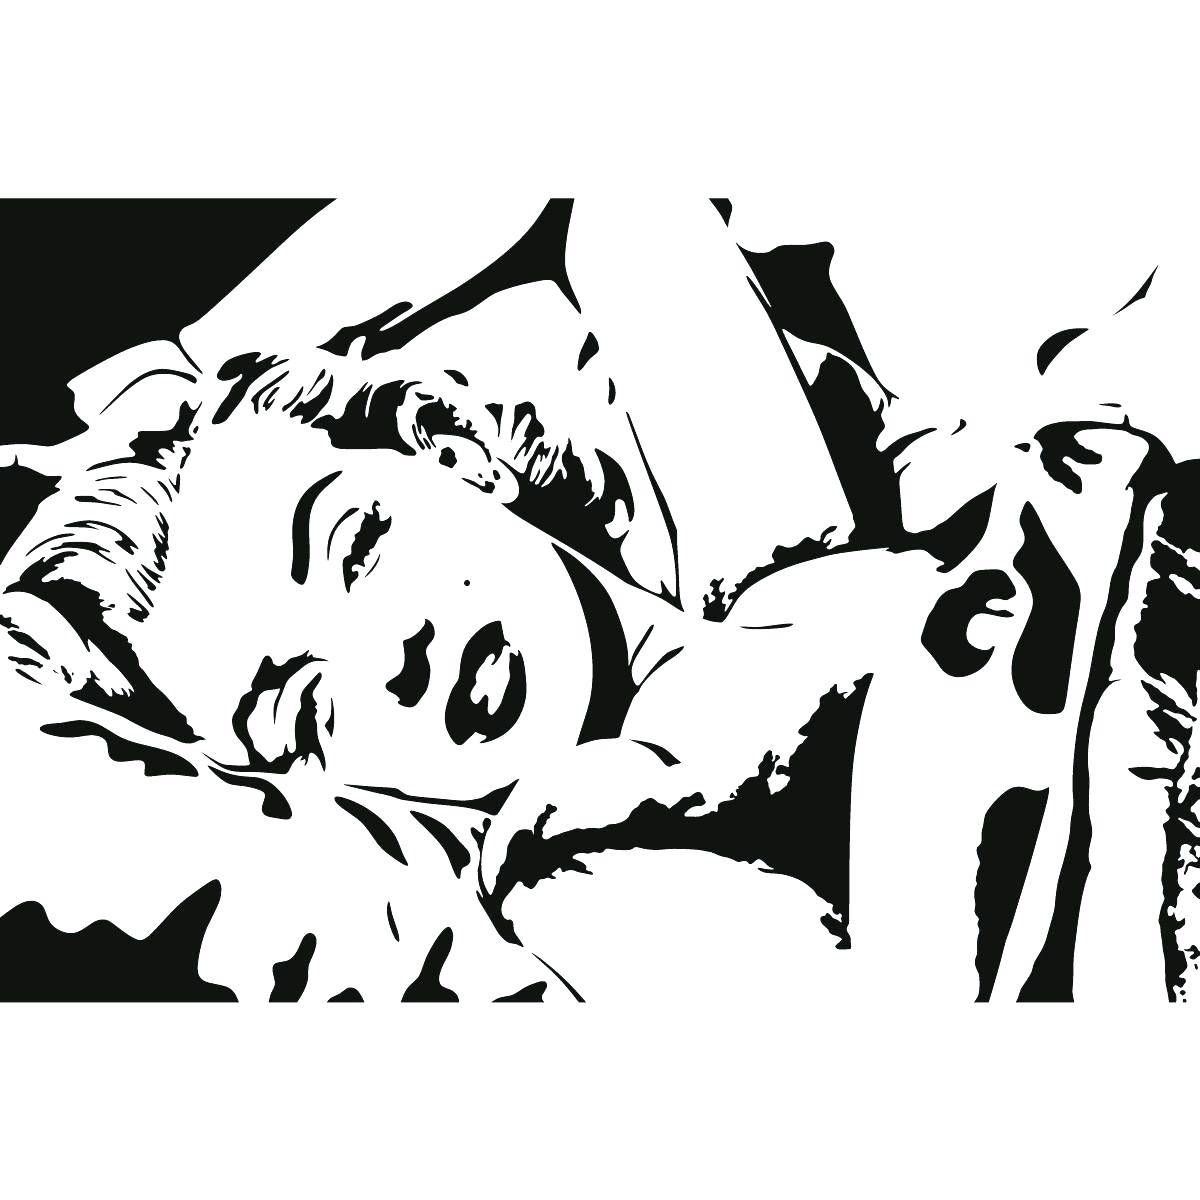 Wall Decals Marilyn Monroe Spiritual Quotes Sayings For Lovers Within Most Popular Marilyn Monroe Wall Art Quotes (View 24 of 25)